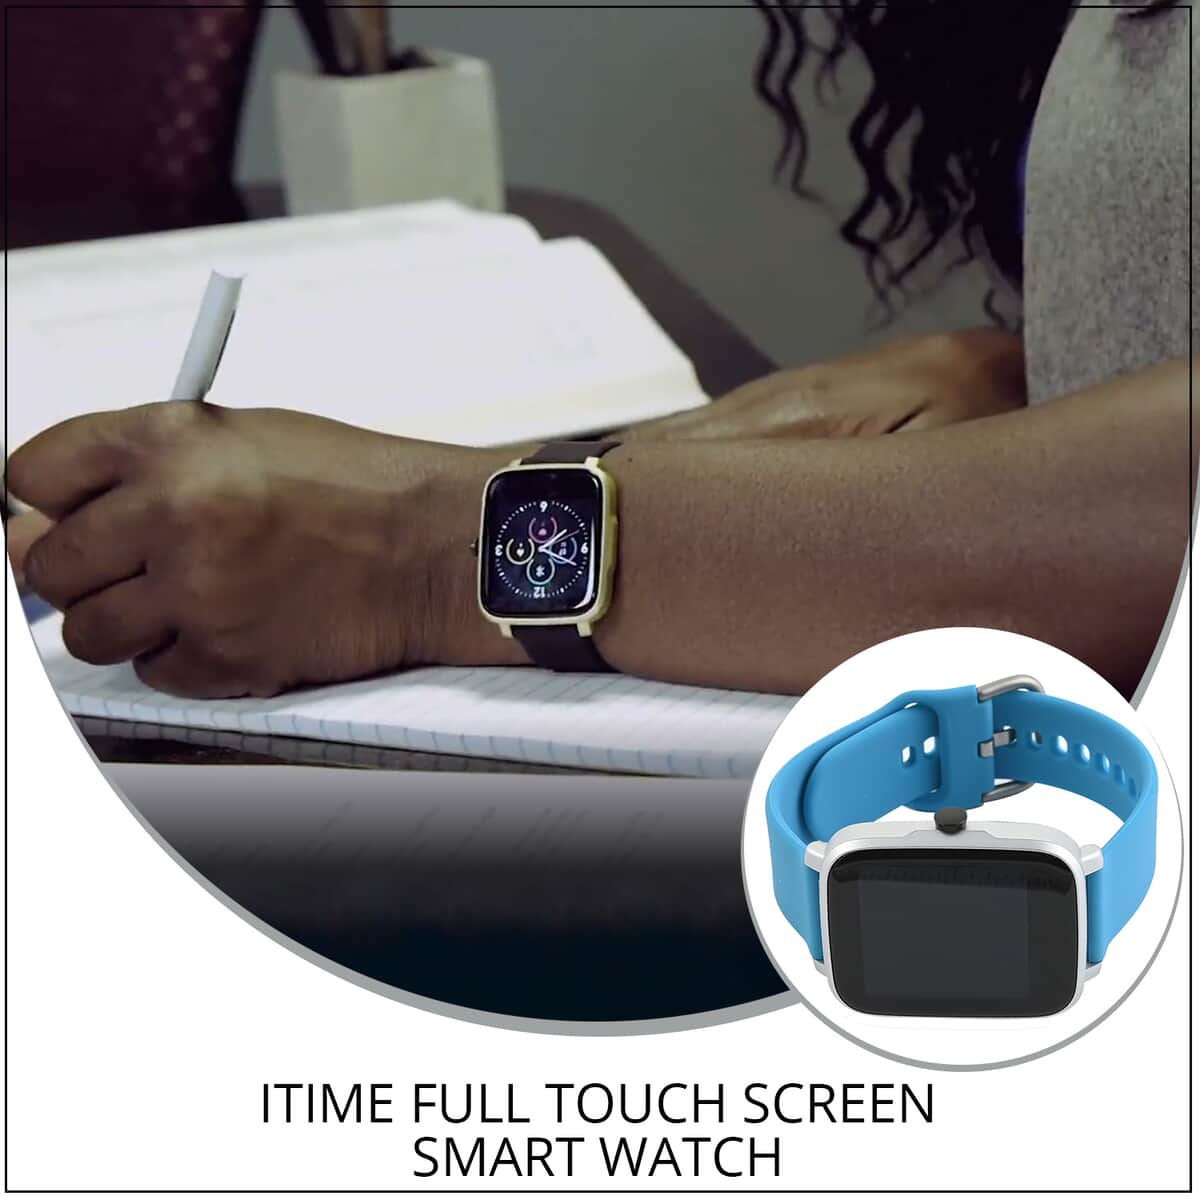 iTime Full Touch Screen Smart Watch with Blue Silicone Strap (40 mm Dial) image number 1